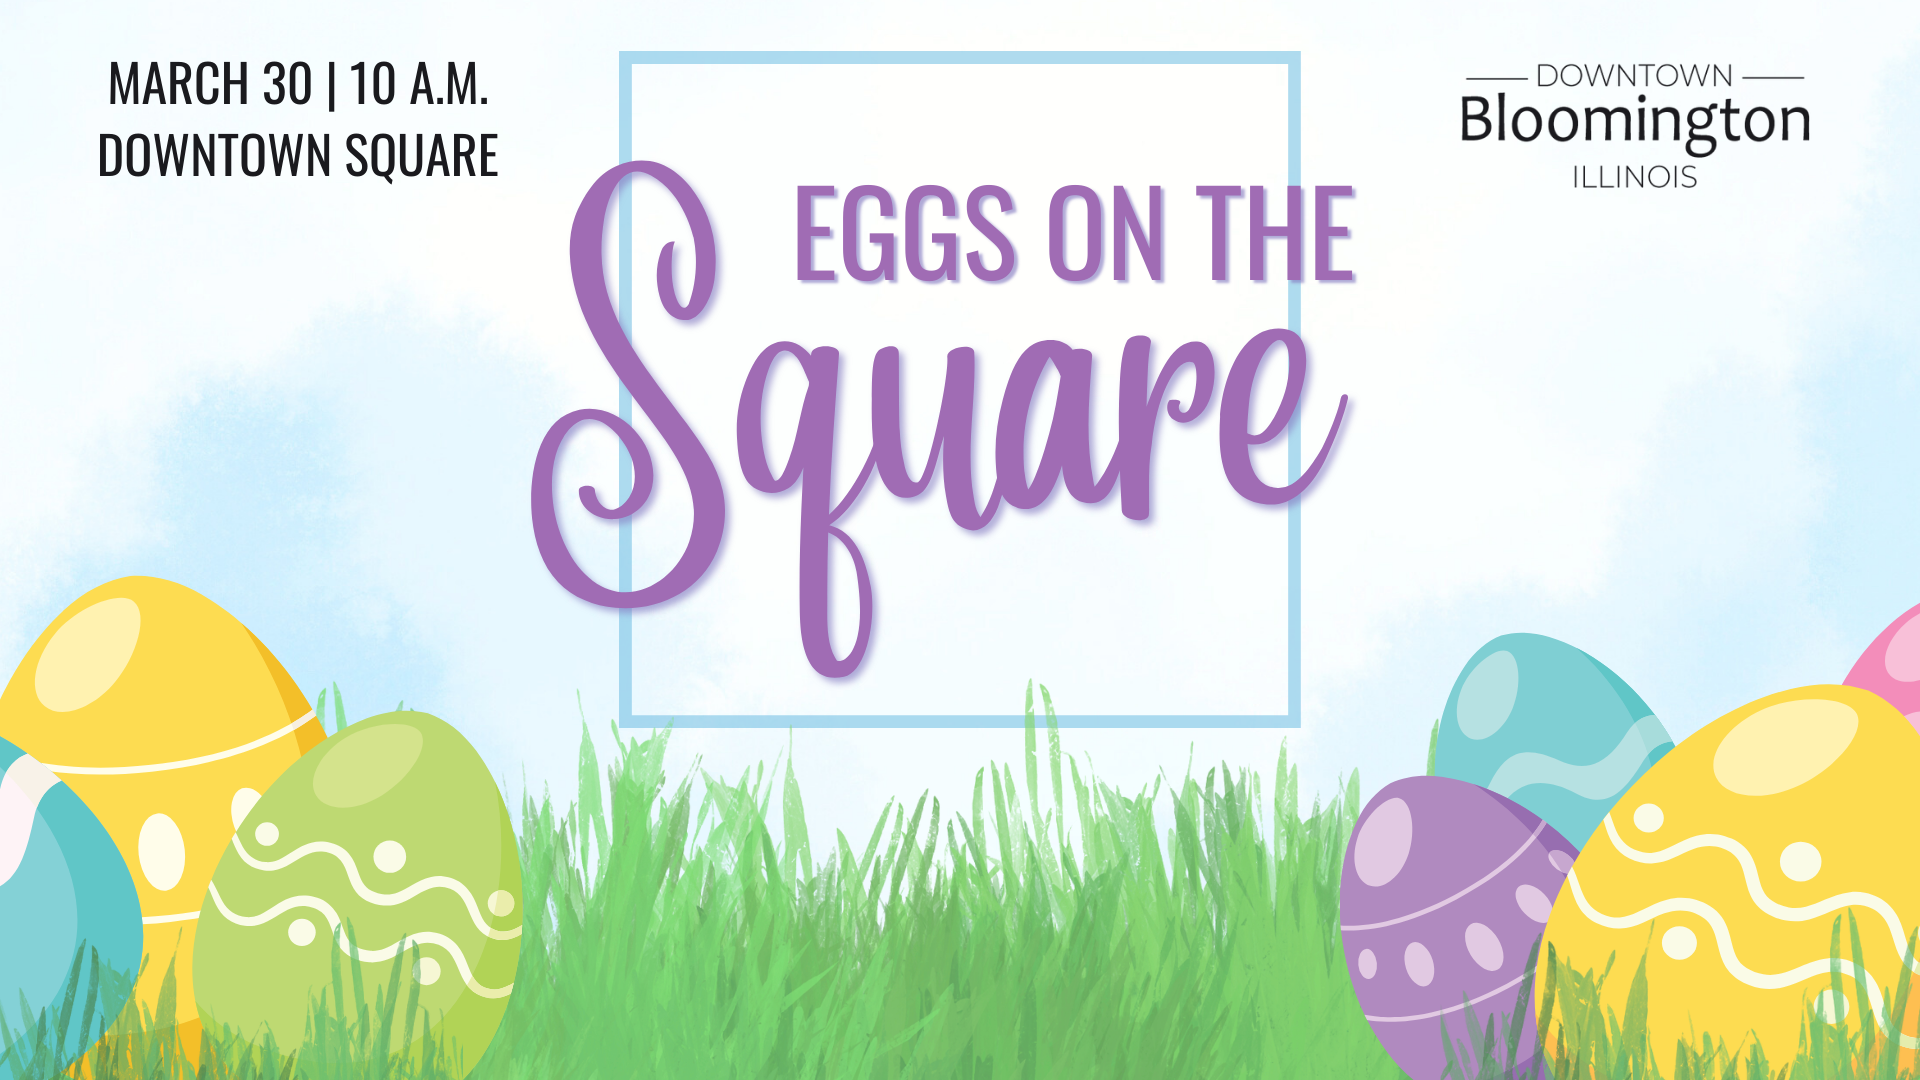 Eggs on the Square